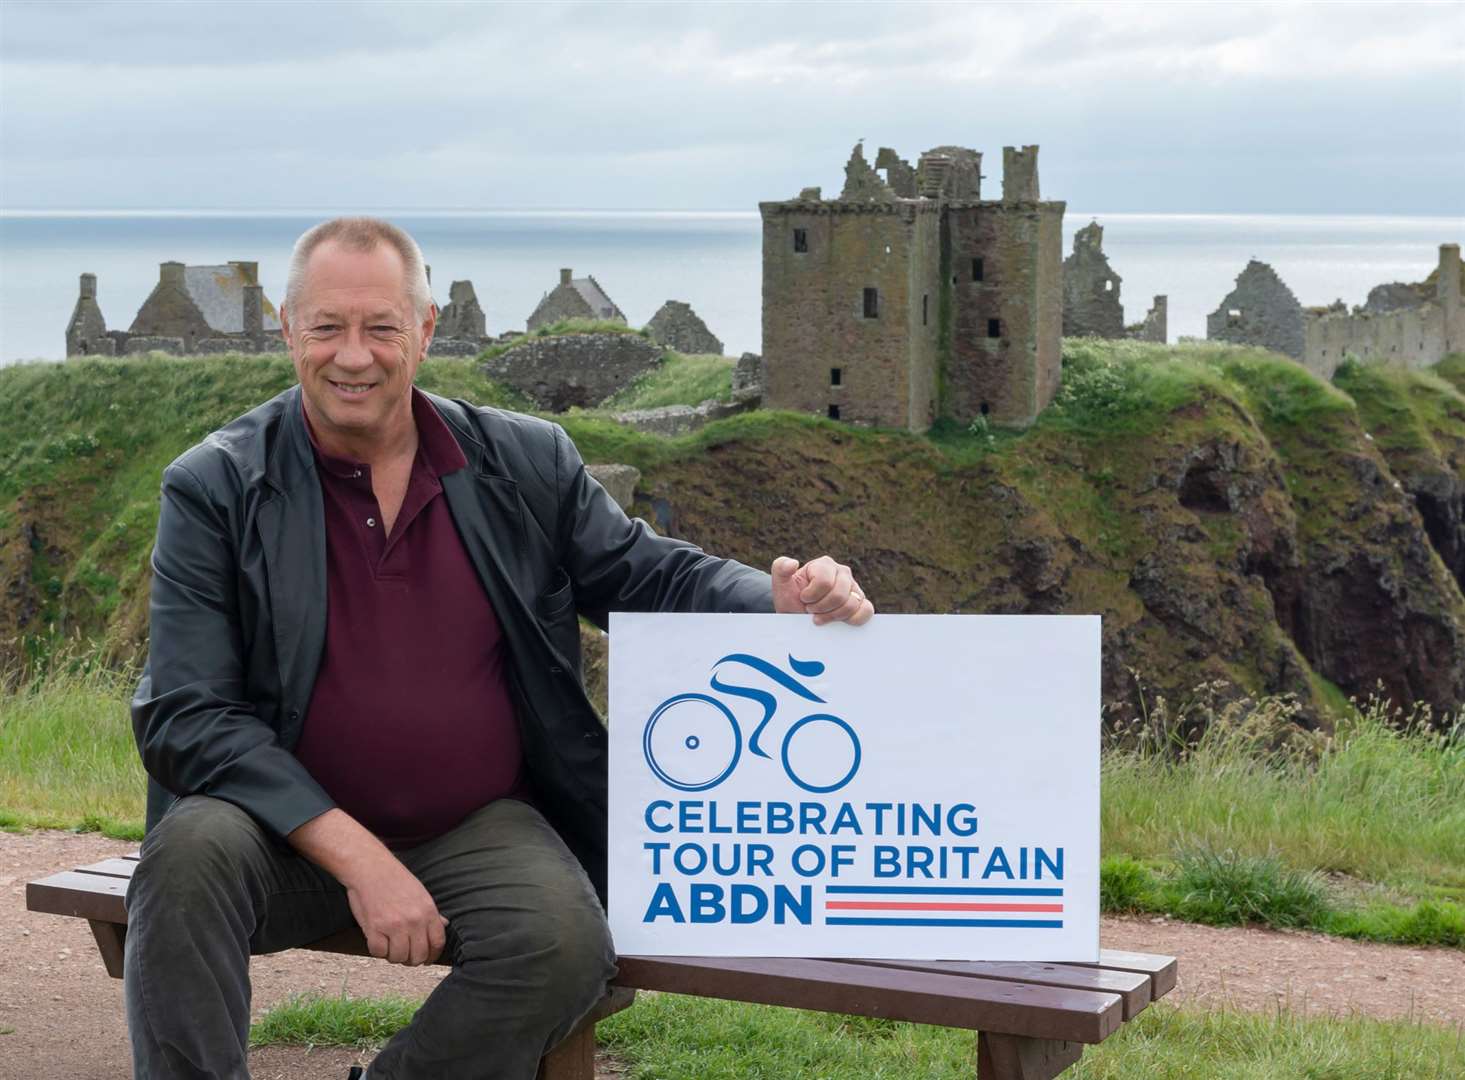 Aberdeenshire Council leader Andy Kille has welcomed the Tour of Britian announcement.